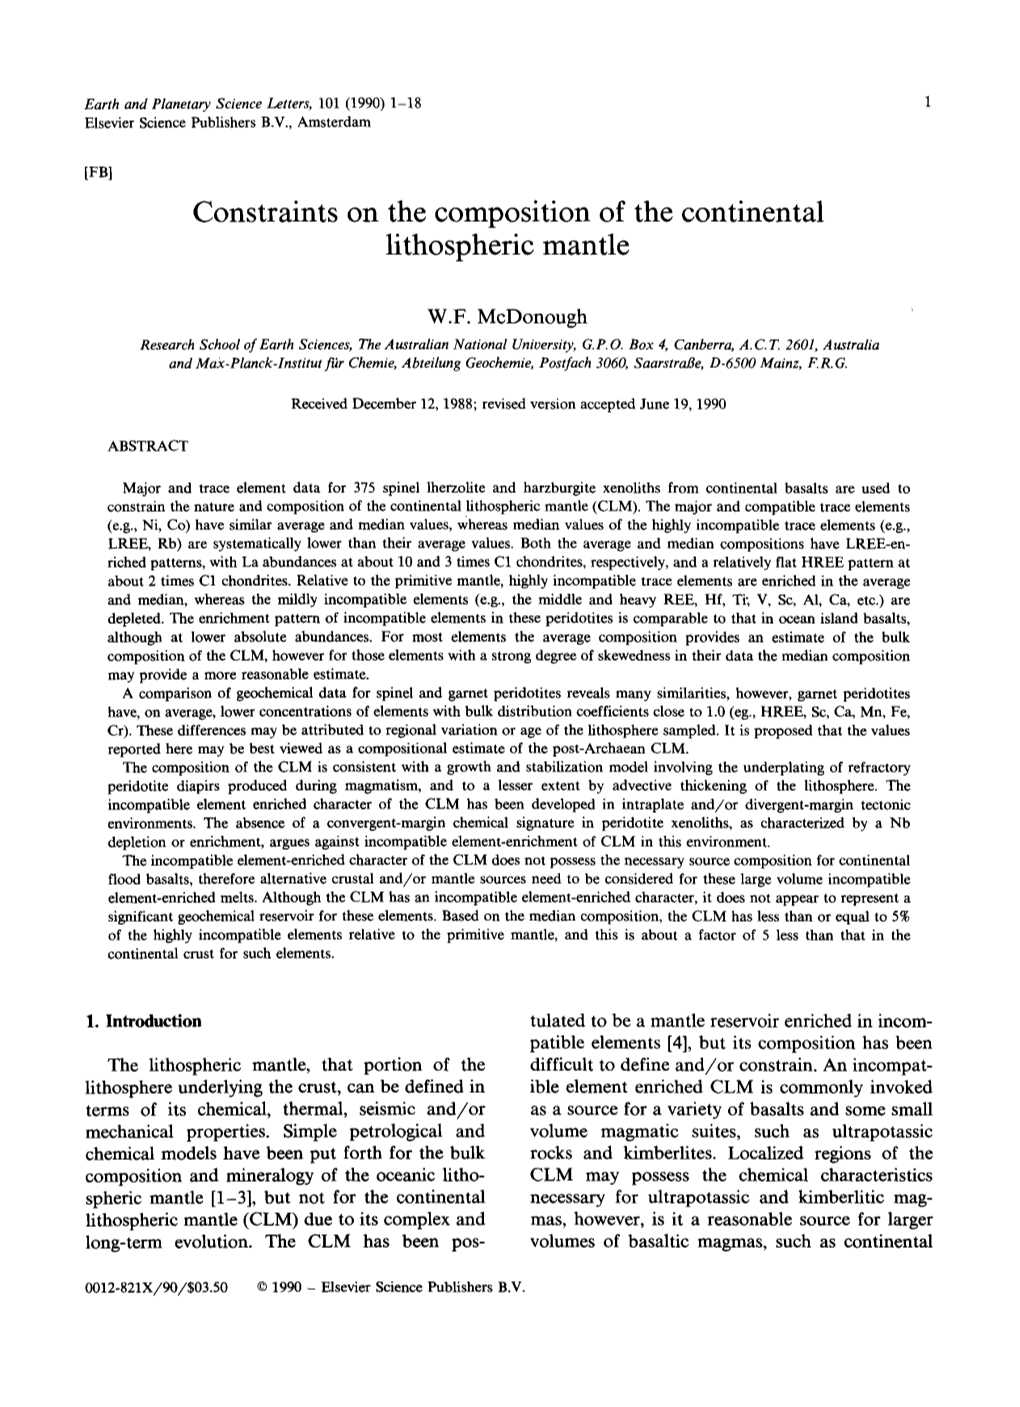 Constraints on the Composition of the Continental Lithospheric Mantle